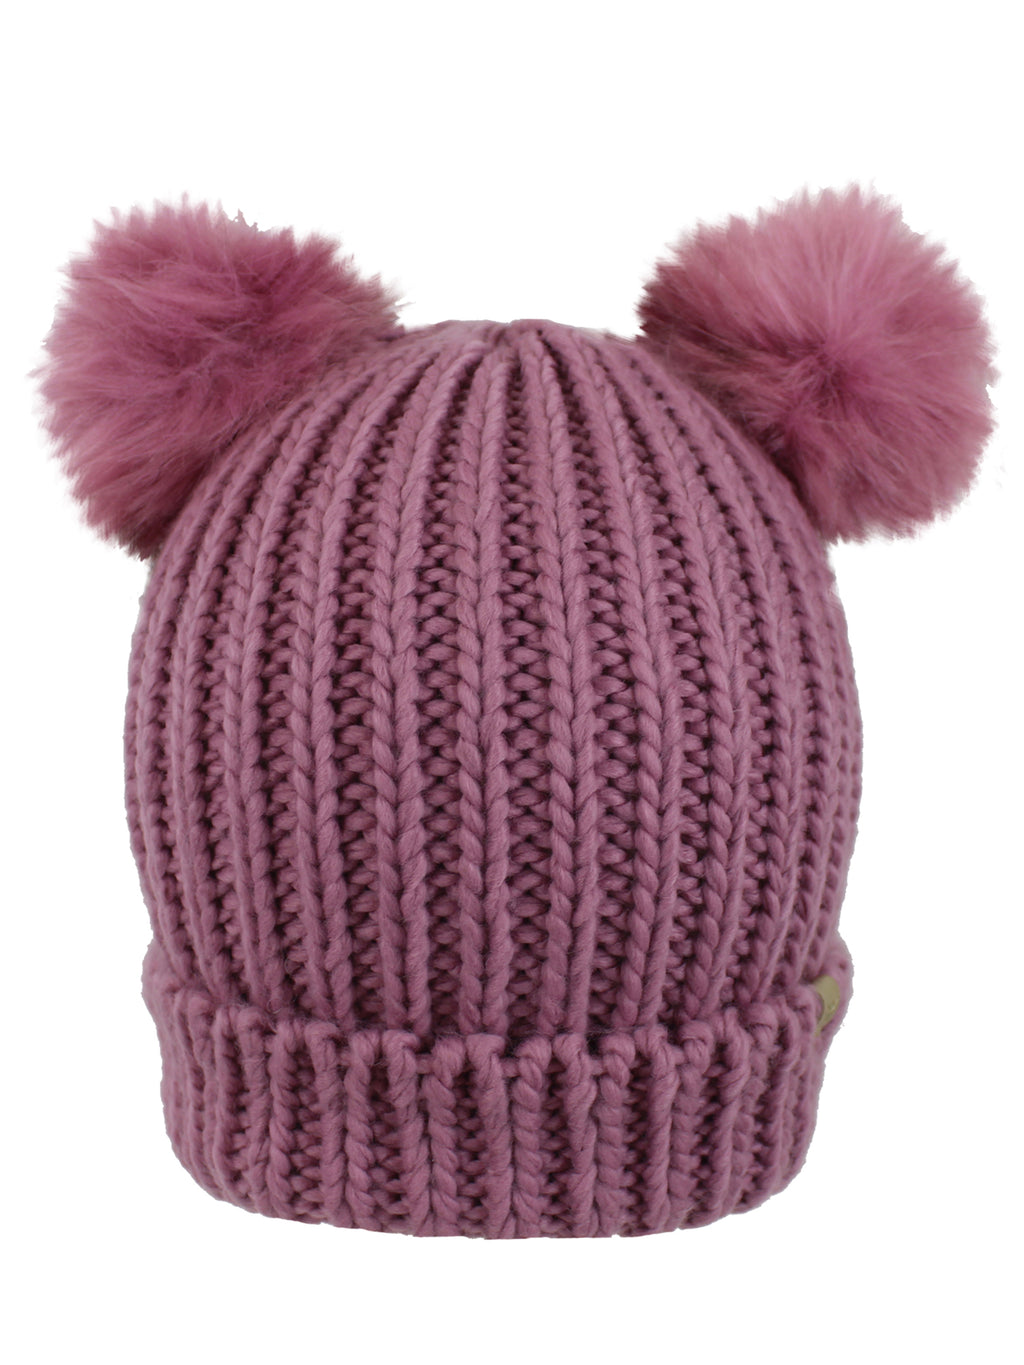 Dusty Pink Knit Beanie Hat With Pigtail Pom Poms